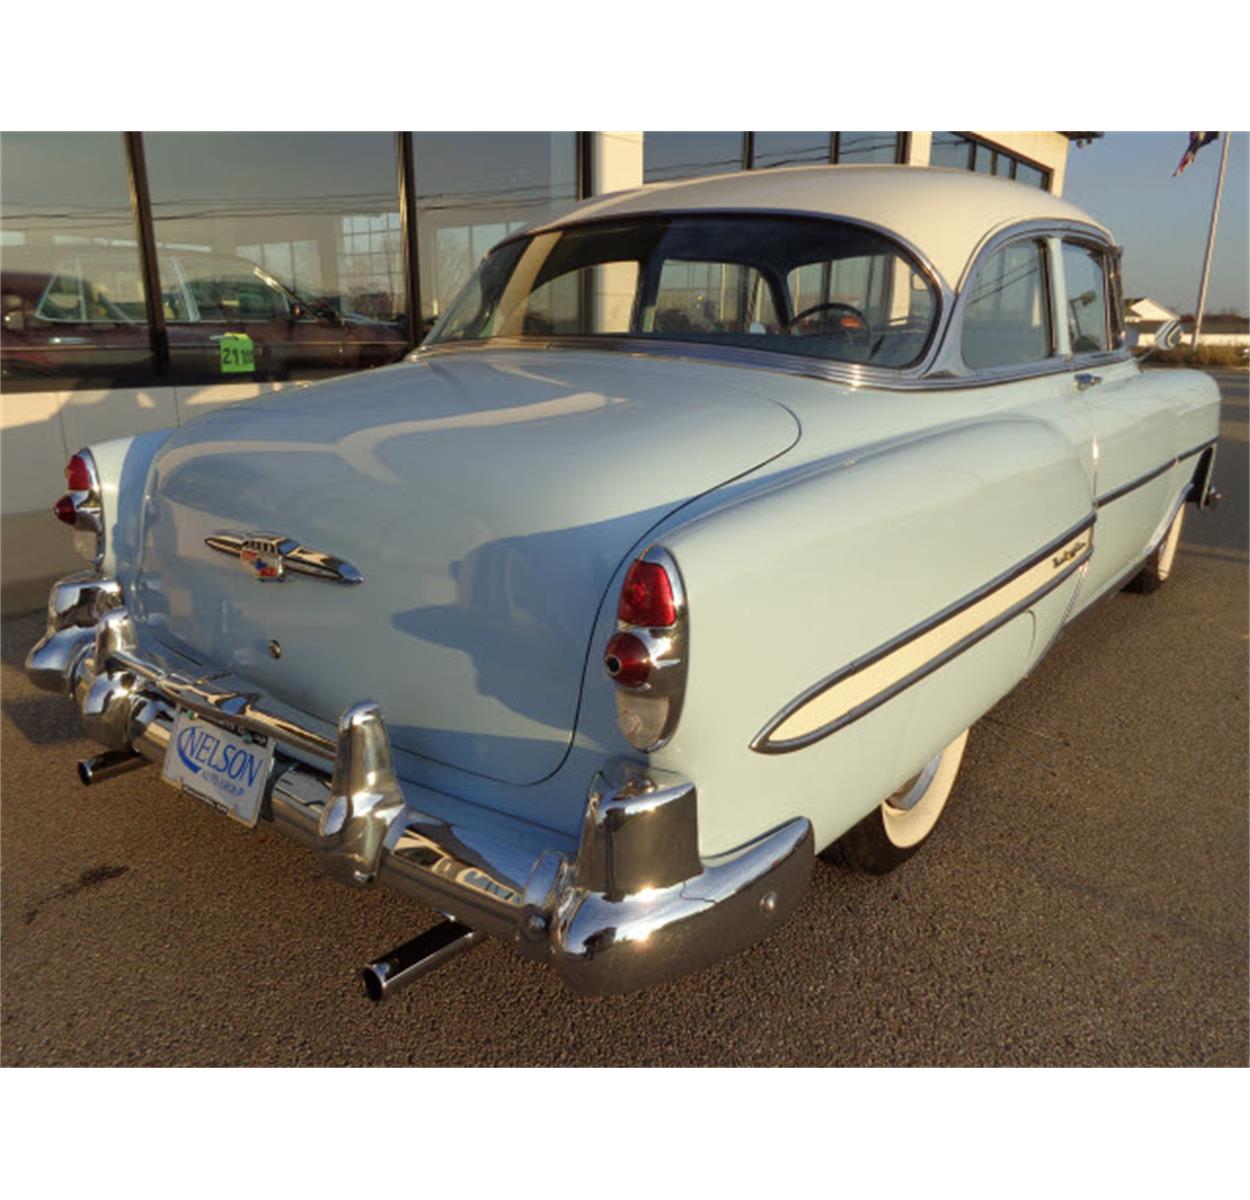 Albums 99+ Images 1953 chevy bel air for sale near me Full HD, 2k, 4k